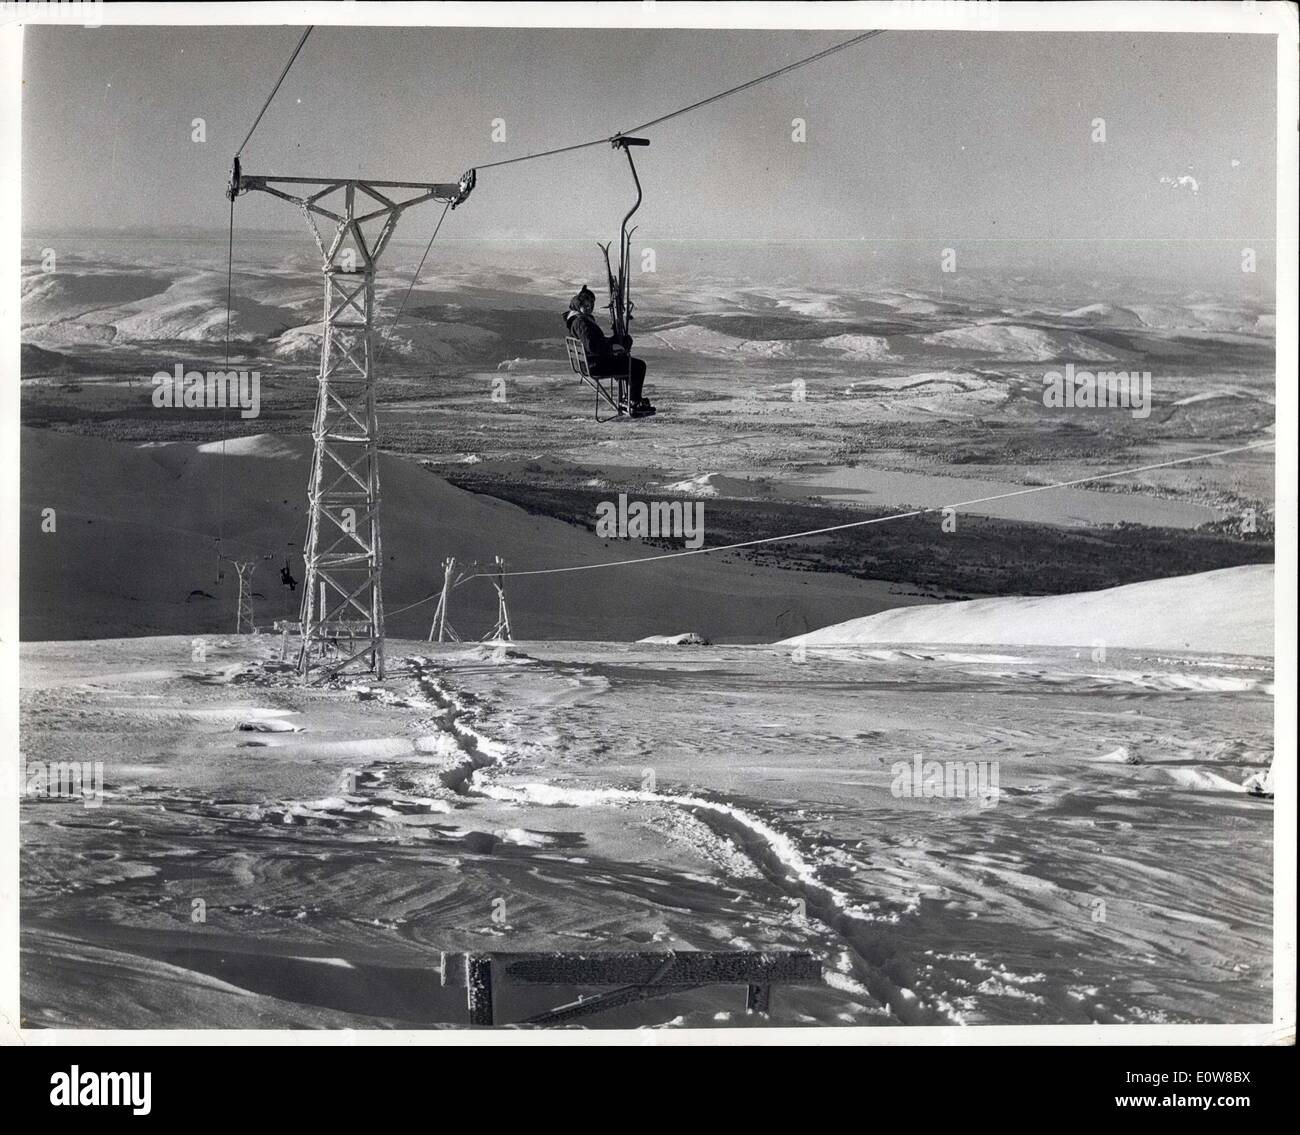 Jan. 04, 1962 - Daily Herald, London. Winter Sports In Scotland. Scotland's biggest ski lift has just been opened in the Cairngorm Mountains 30 miles south of Inverness. Winter sports have now become big business i n Soctland instead of a prank as in kprevious years. The Speyside hteliers have combined to start the Cairgorn Development Association and put 120,000 into improving sports facilities. Already crowds of English and cottish visitors are enjoying skiing with similar facilities to those in Switzerland and Austria Stock Photo